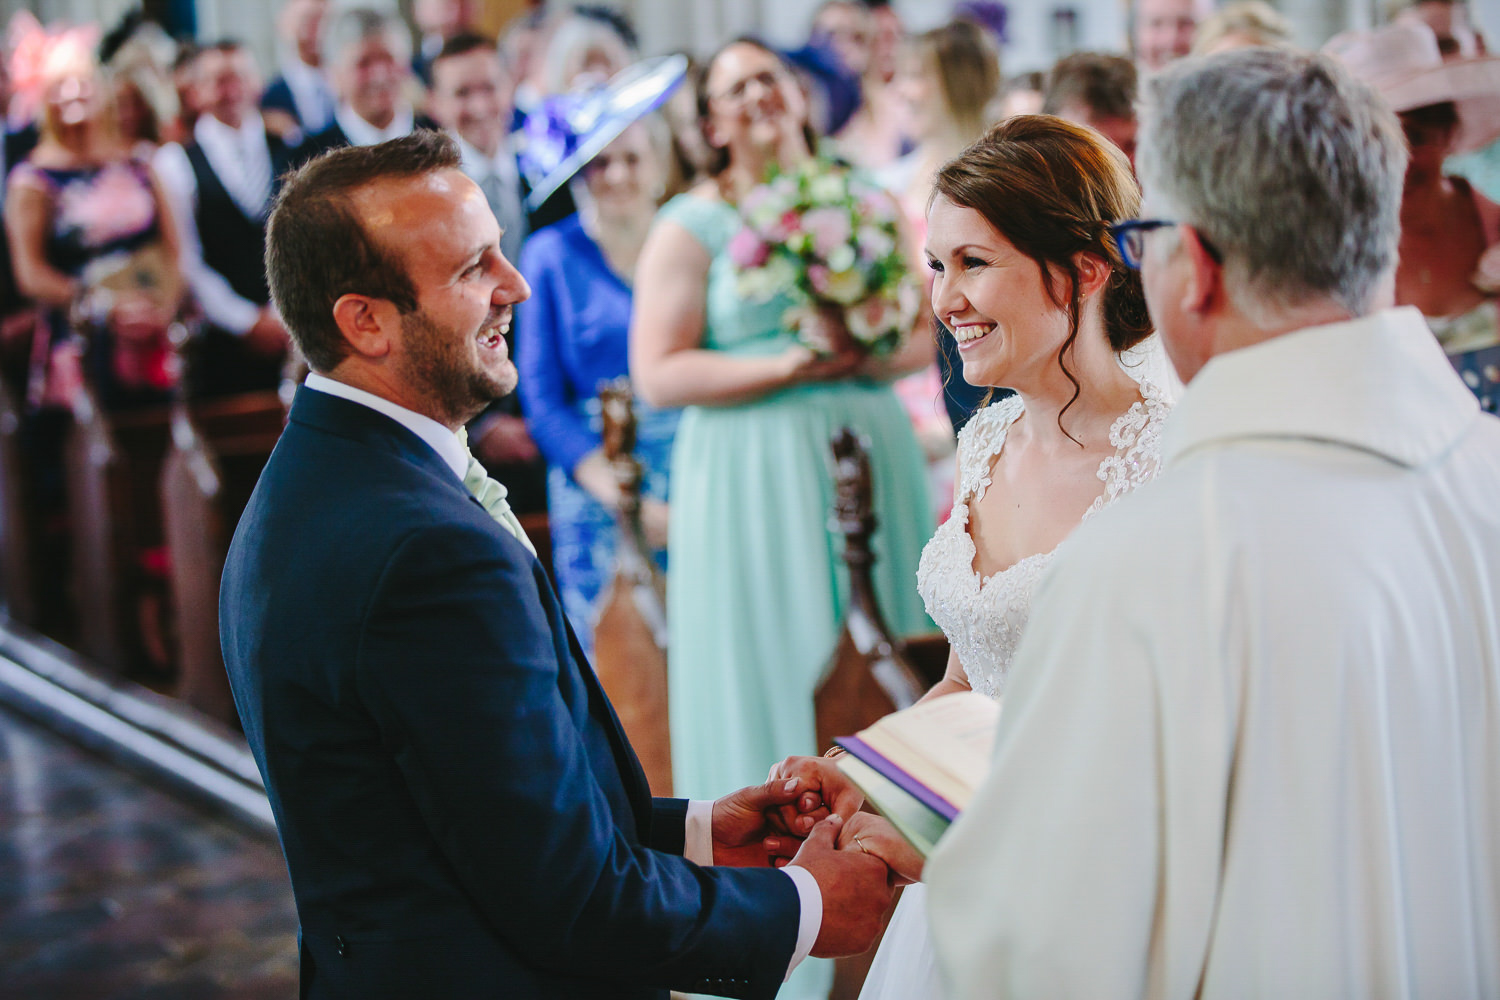 Bride and groom smiling during church wedding ceremony